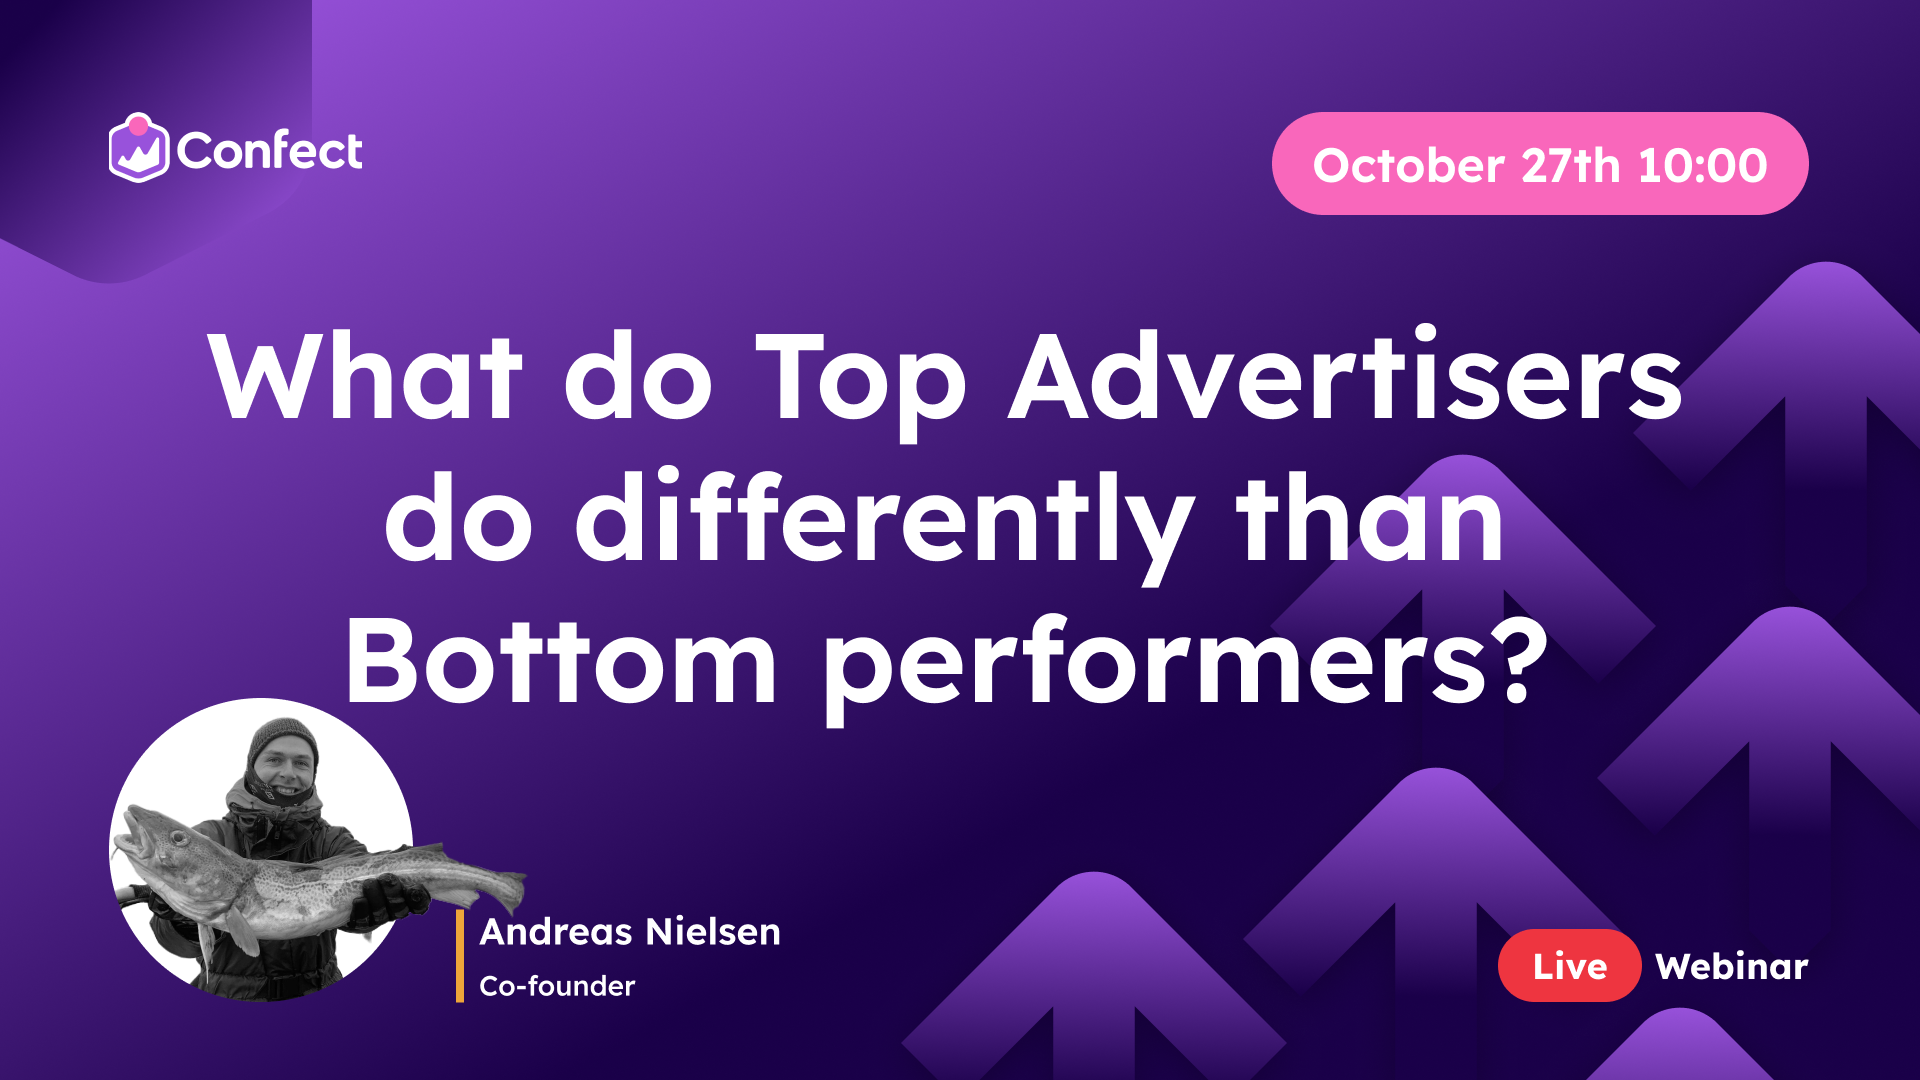 Who do top advertisers do 